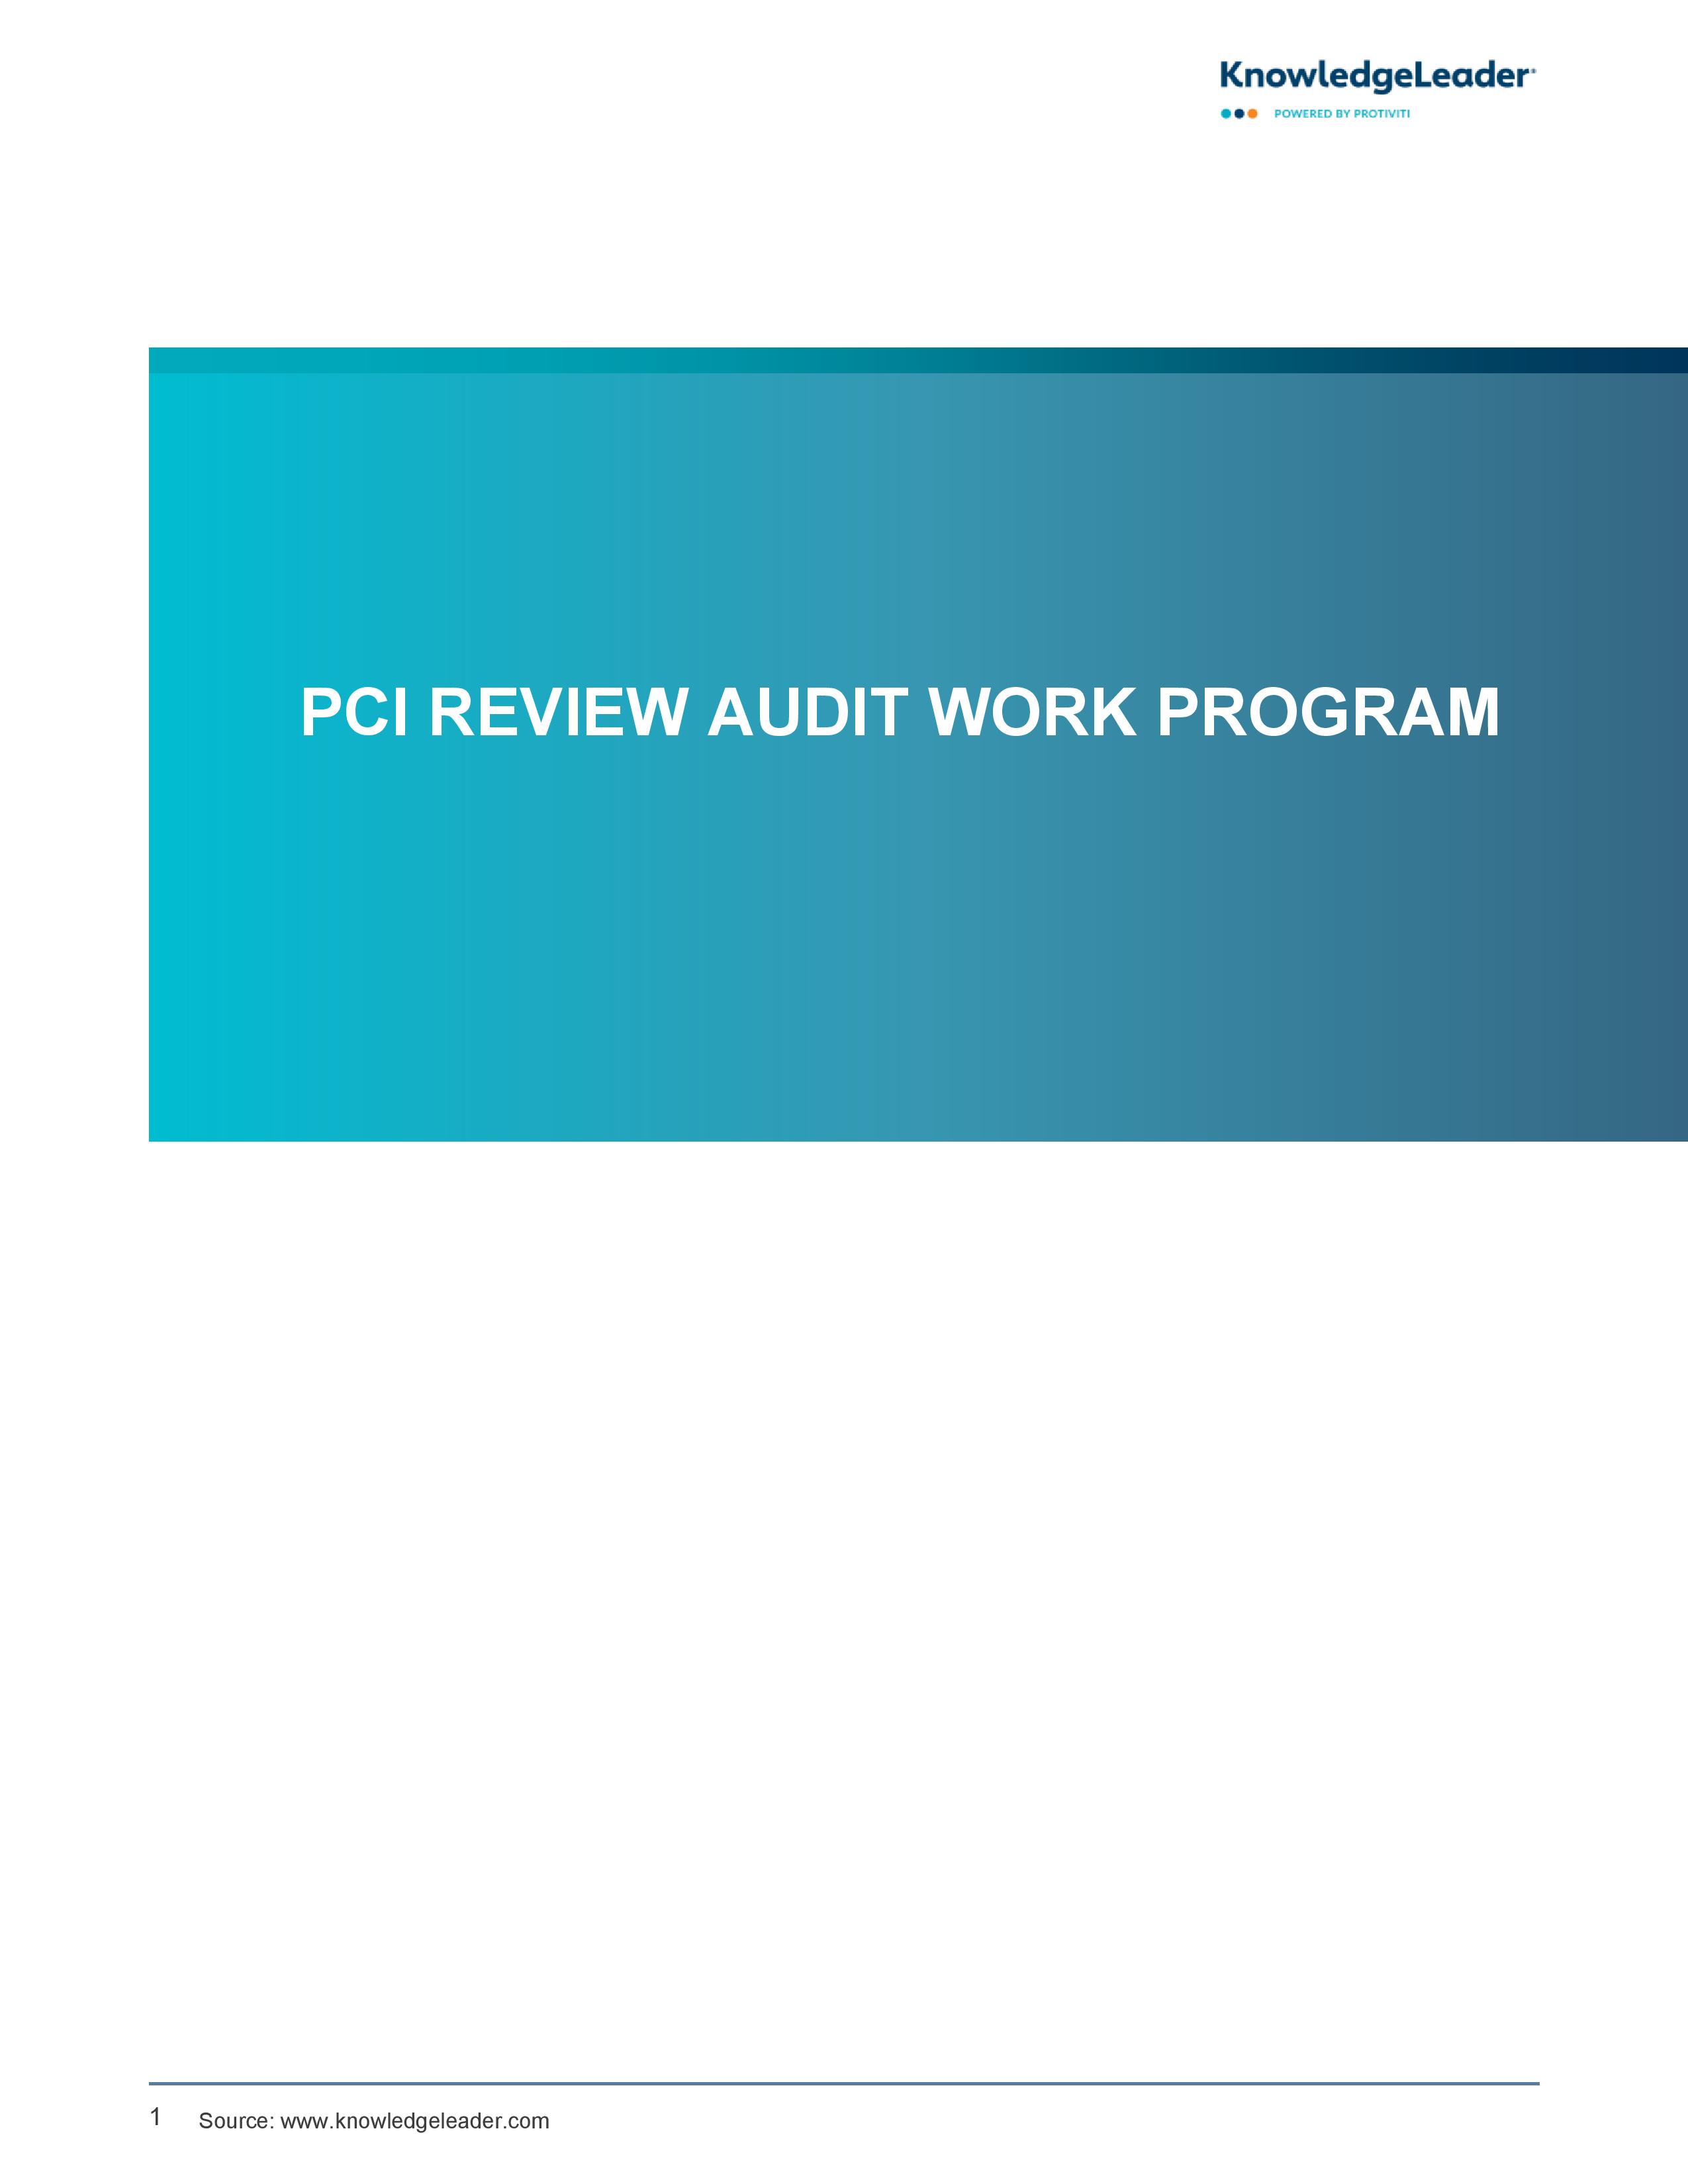 Screenshot of the first page of PCI Review Audit Work Program